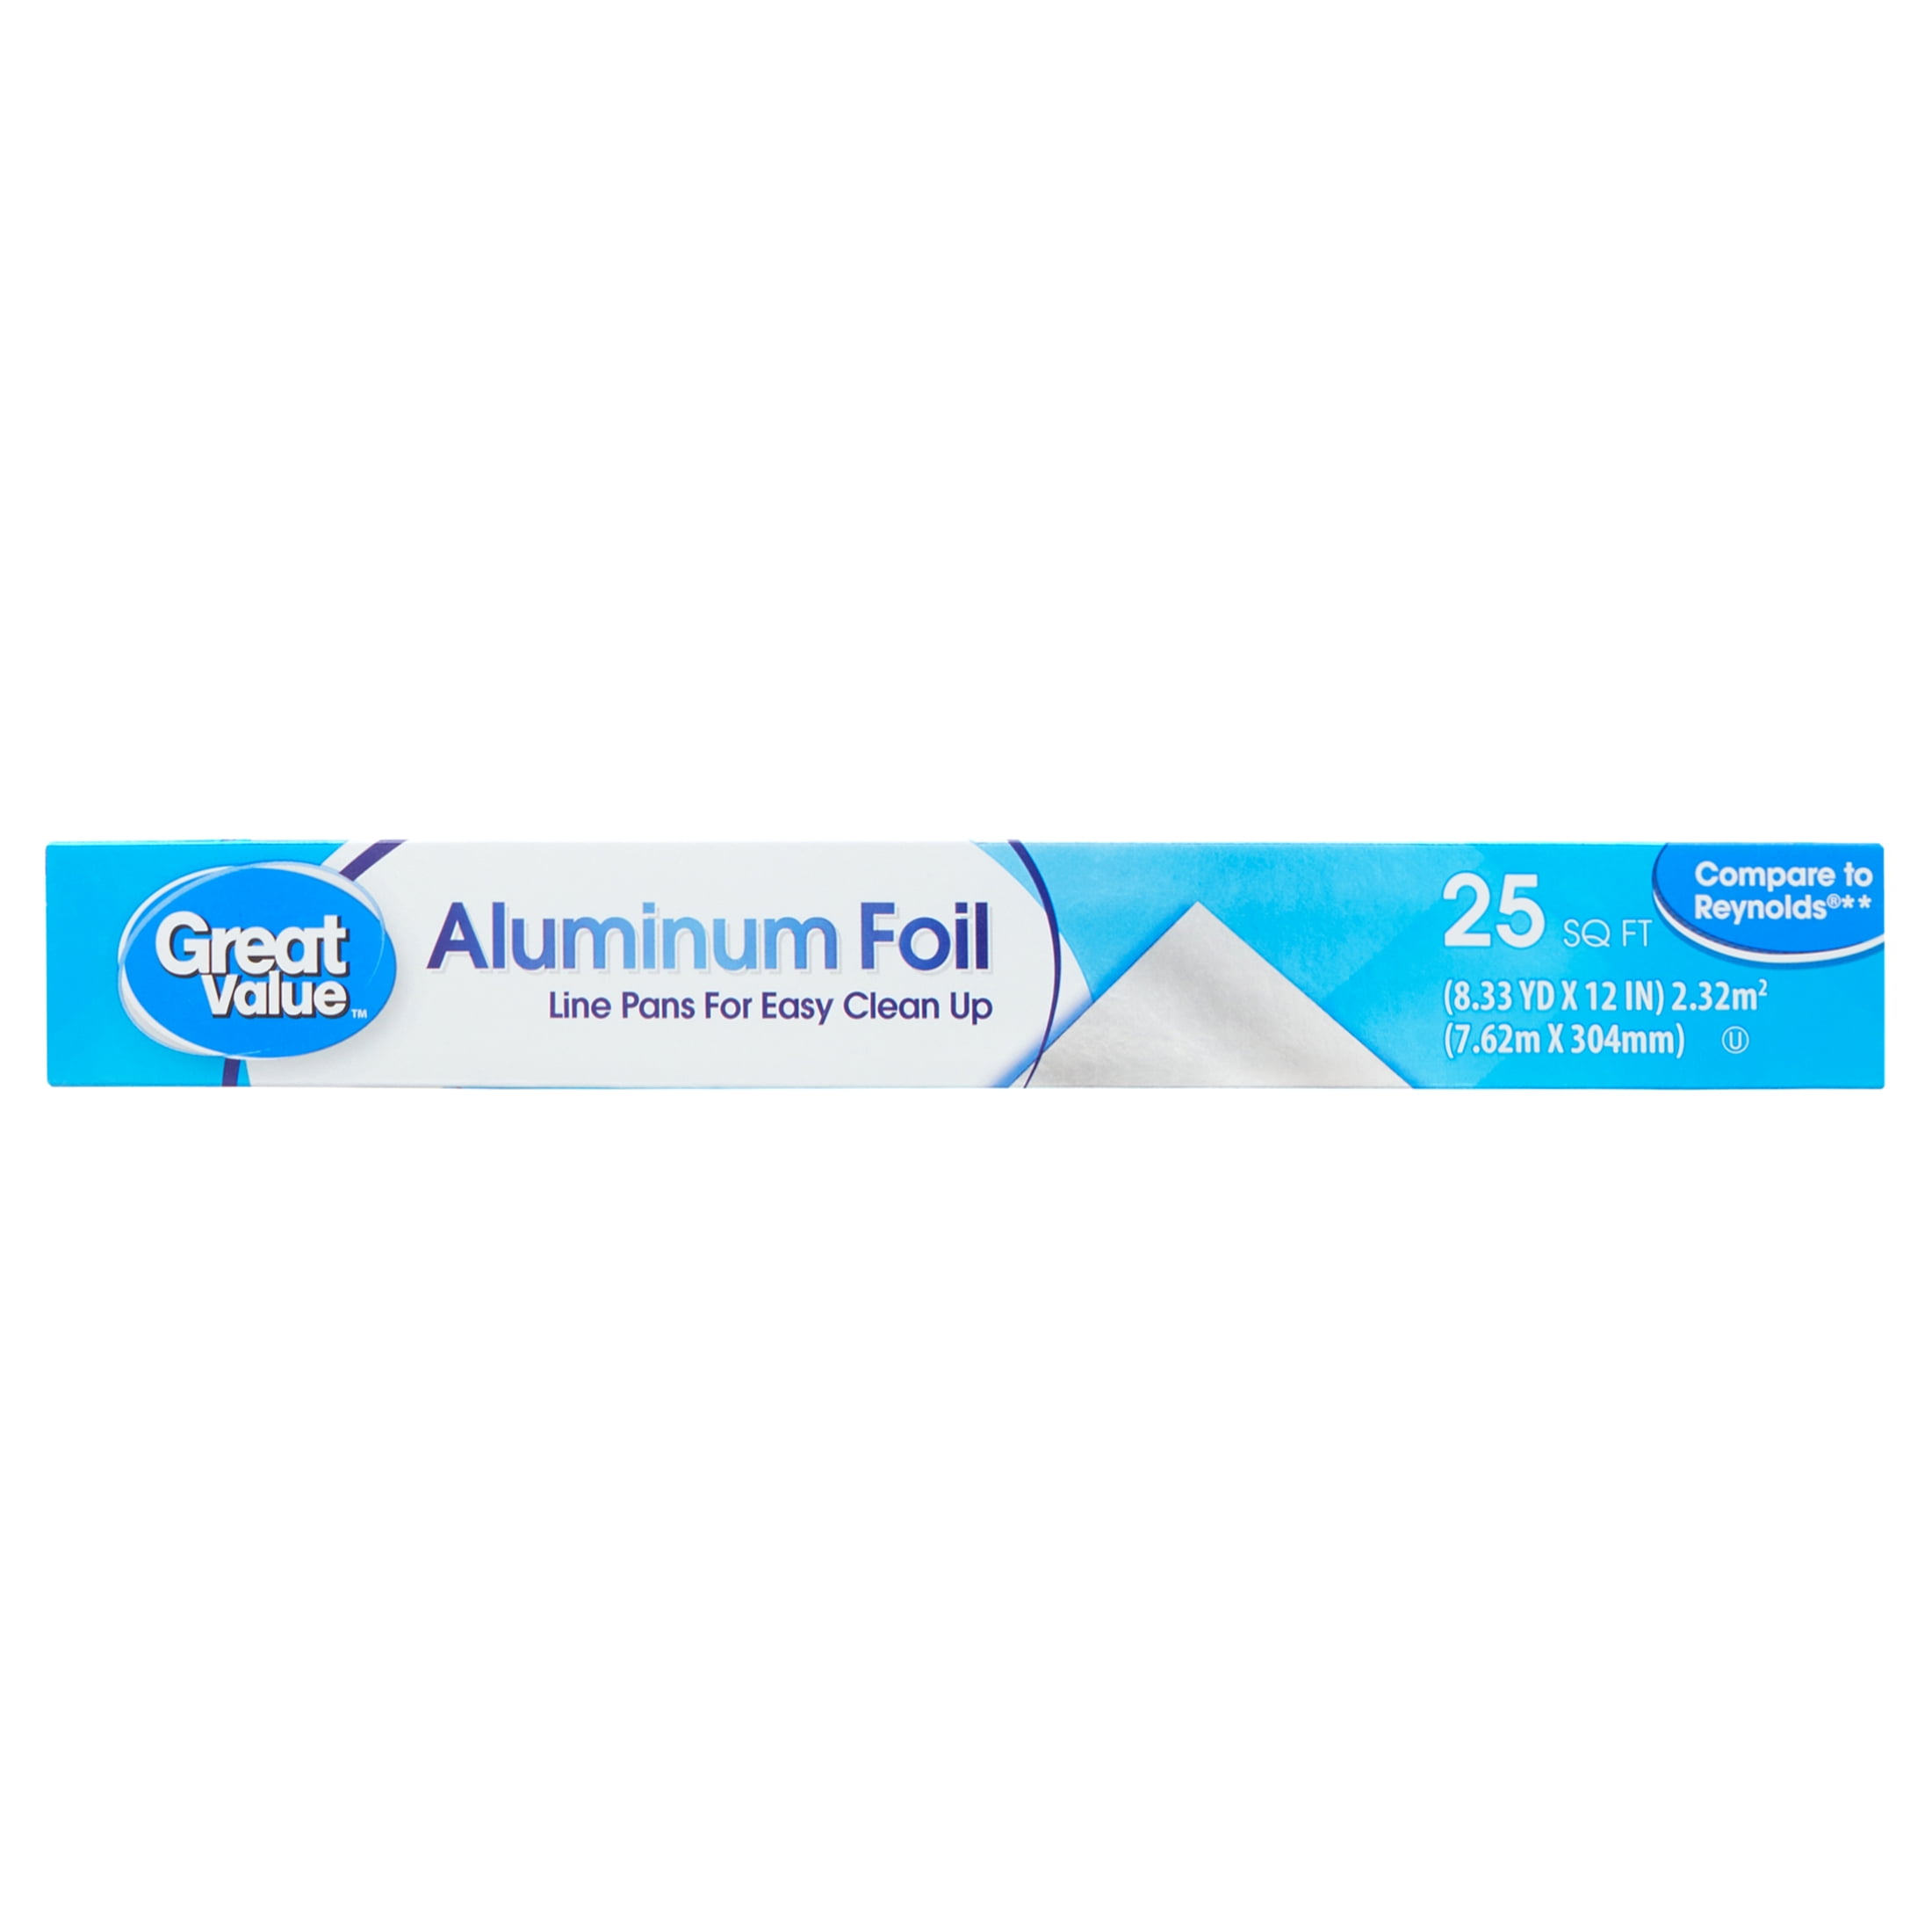 12x KITCHEN TIN FOIL BACO ALUMINIUM ROLL CATERING STRONG XTRA WIDE 450mm X 25 FT